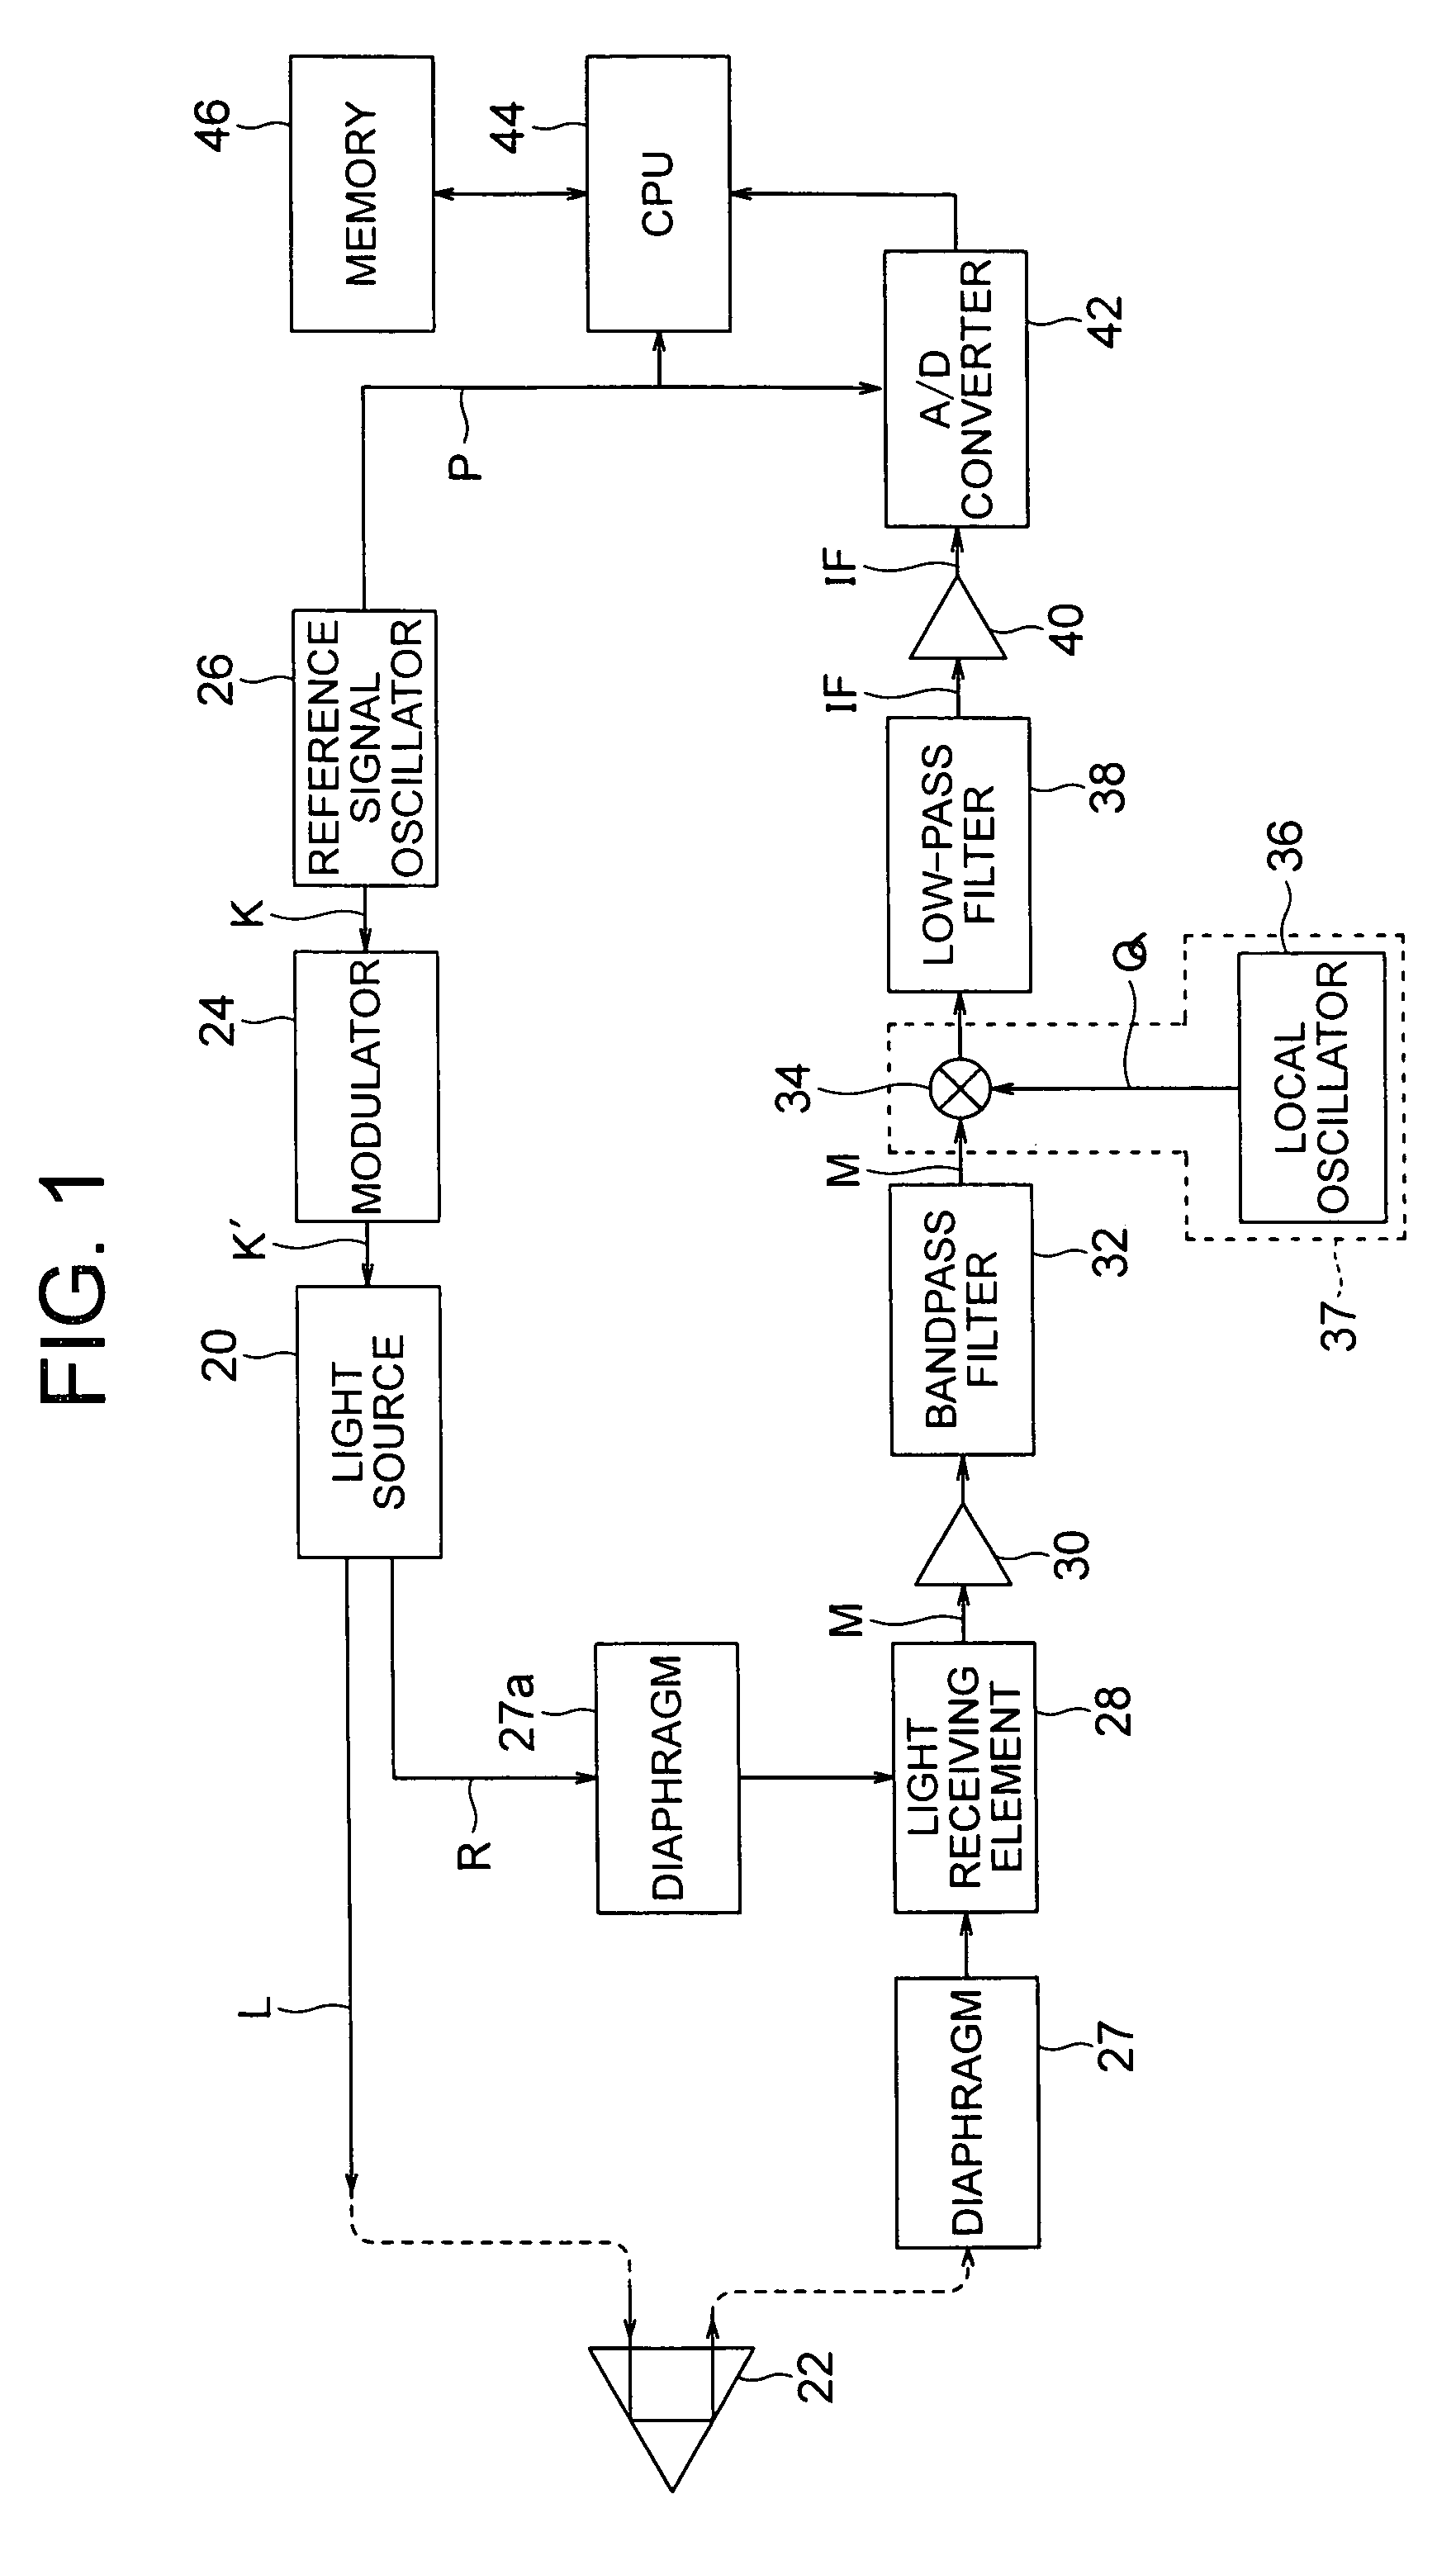 Distance measuring device and method thereof